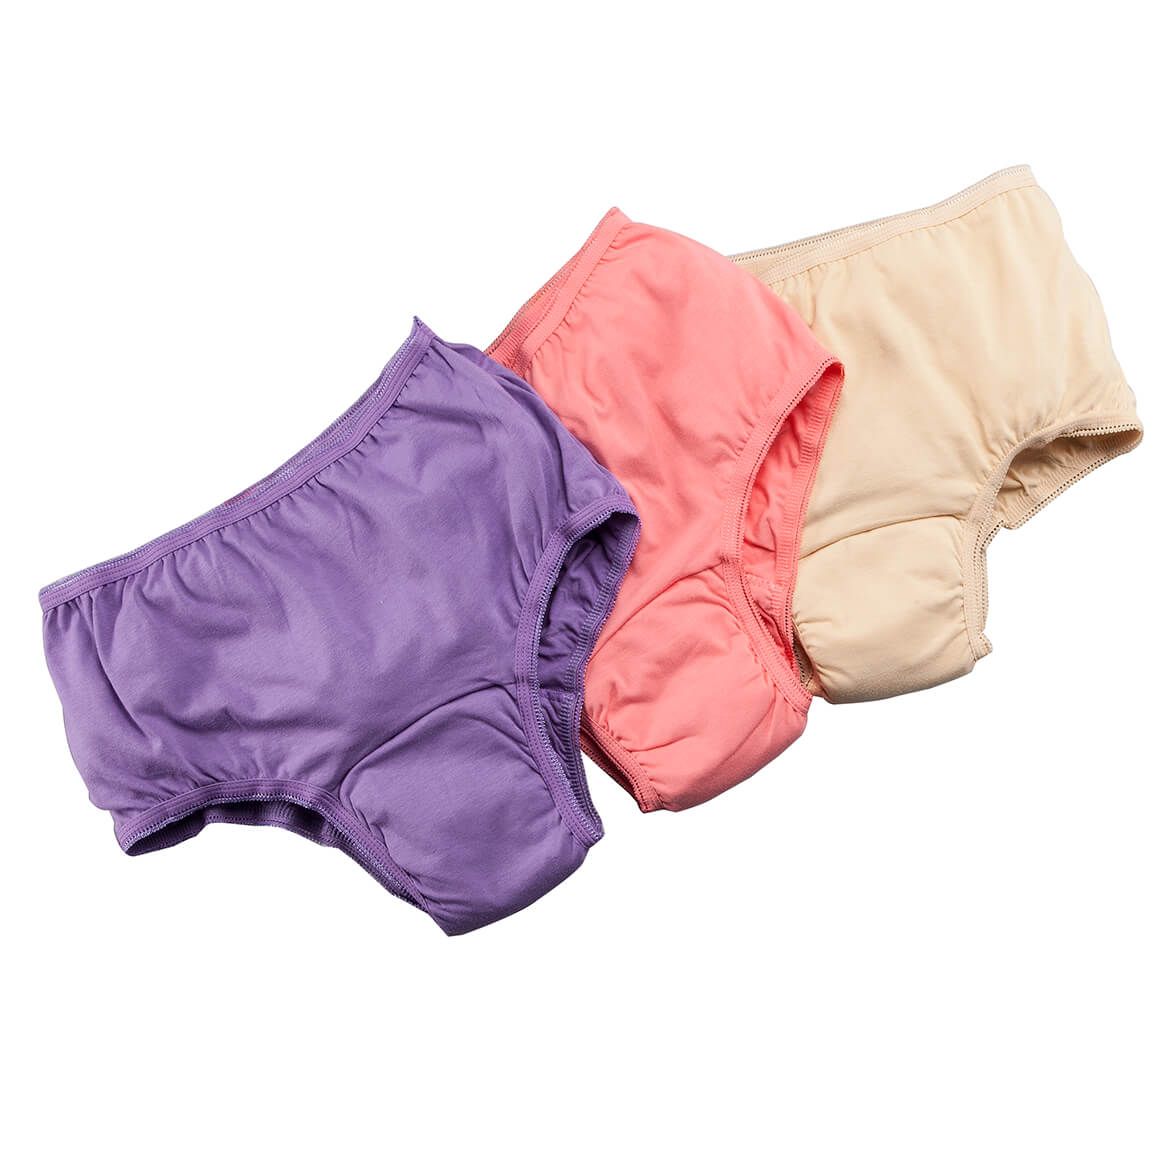 3-Pack Women's Incontinence Underwear Reusable Washable Urinary